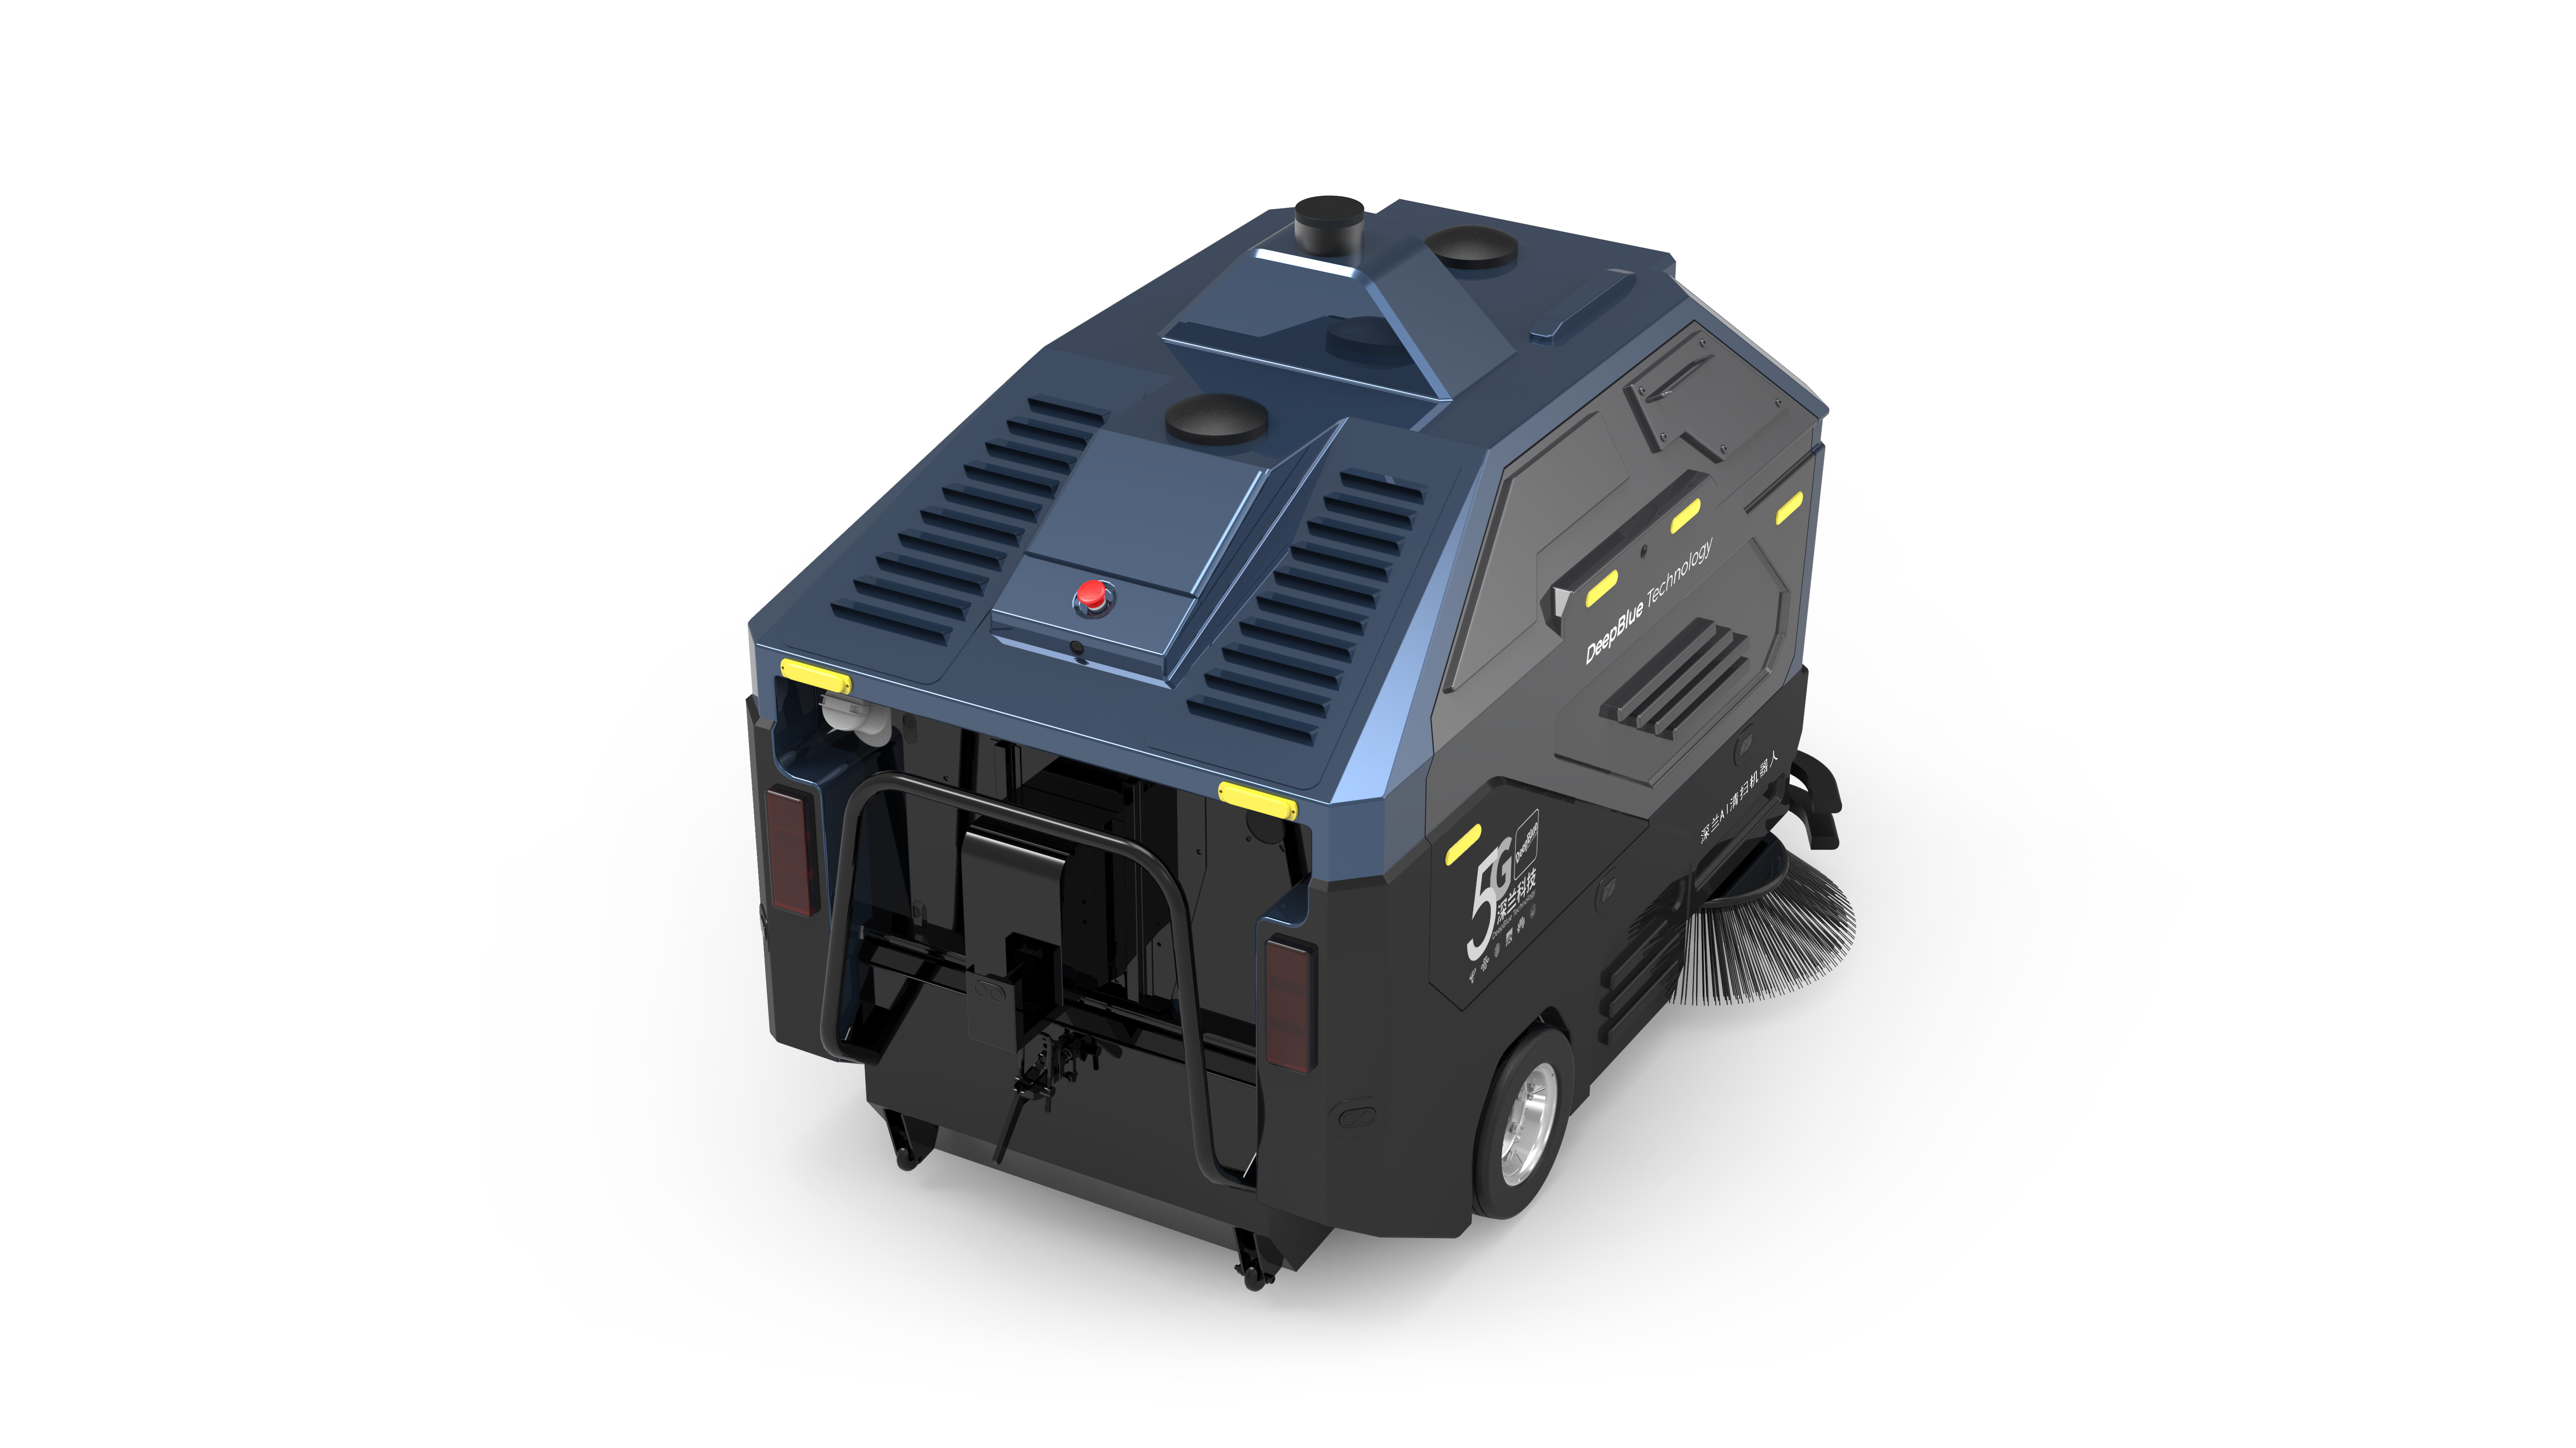 Outdoor Sweeper Robot Company